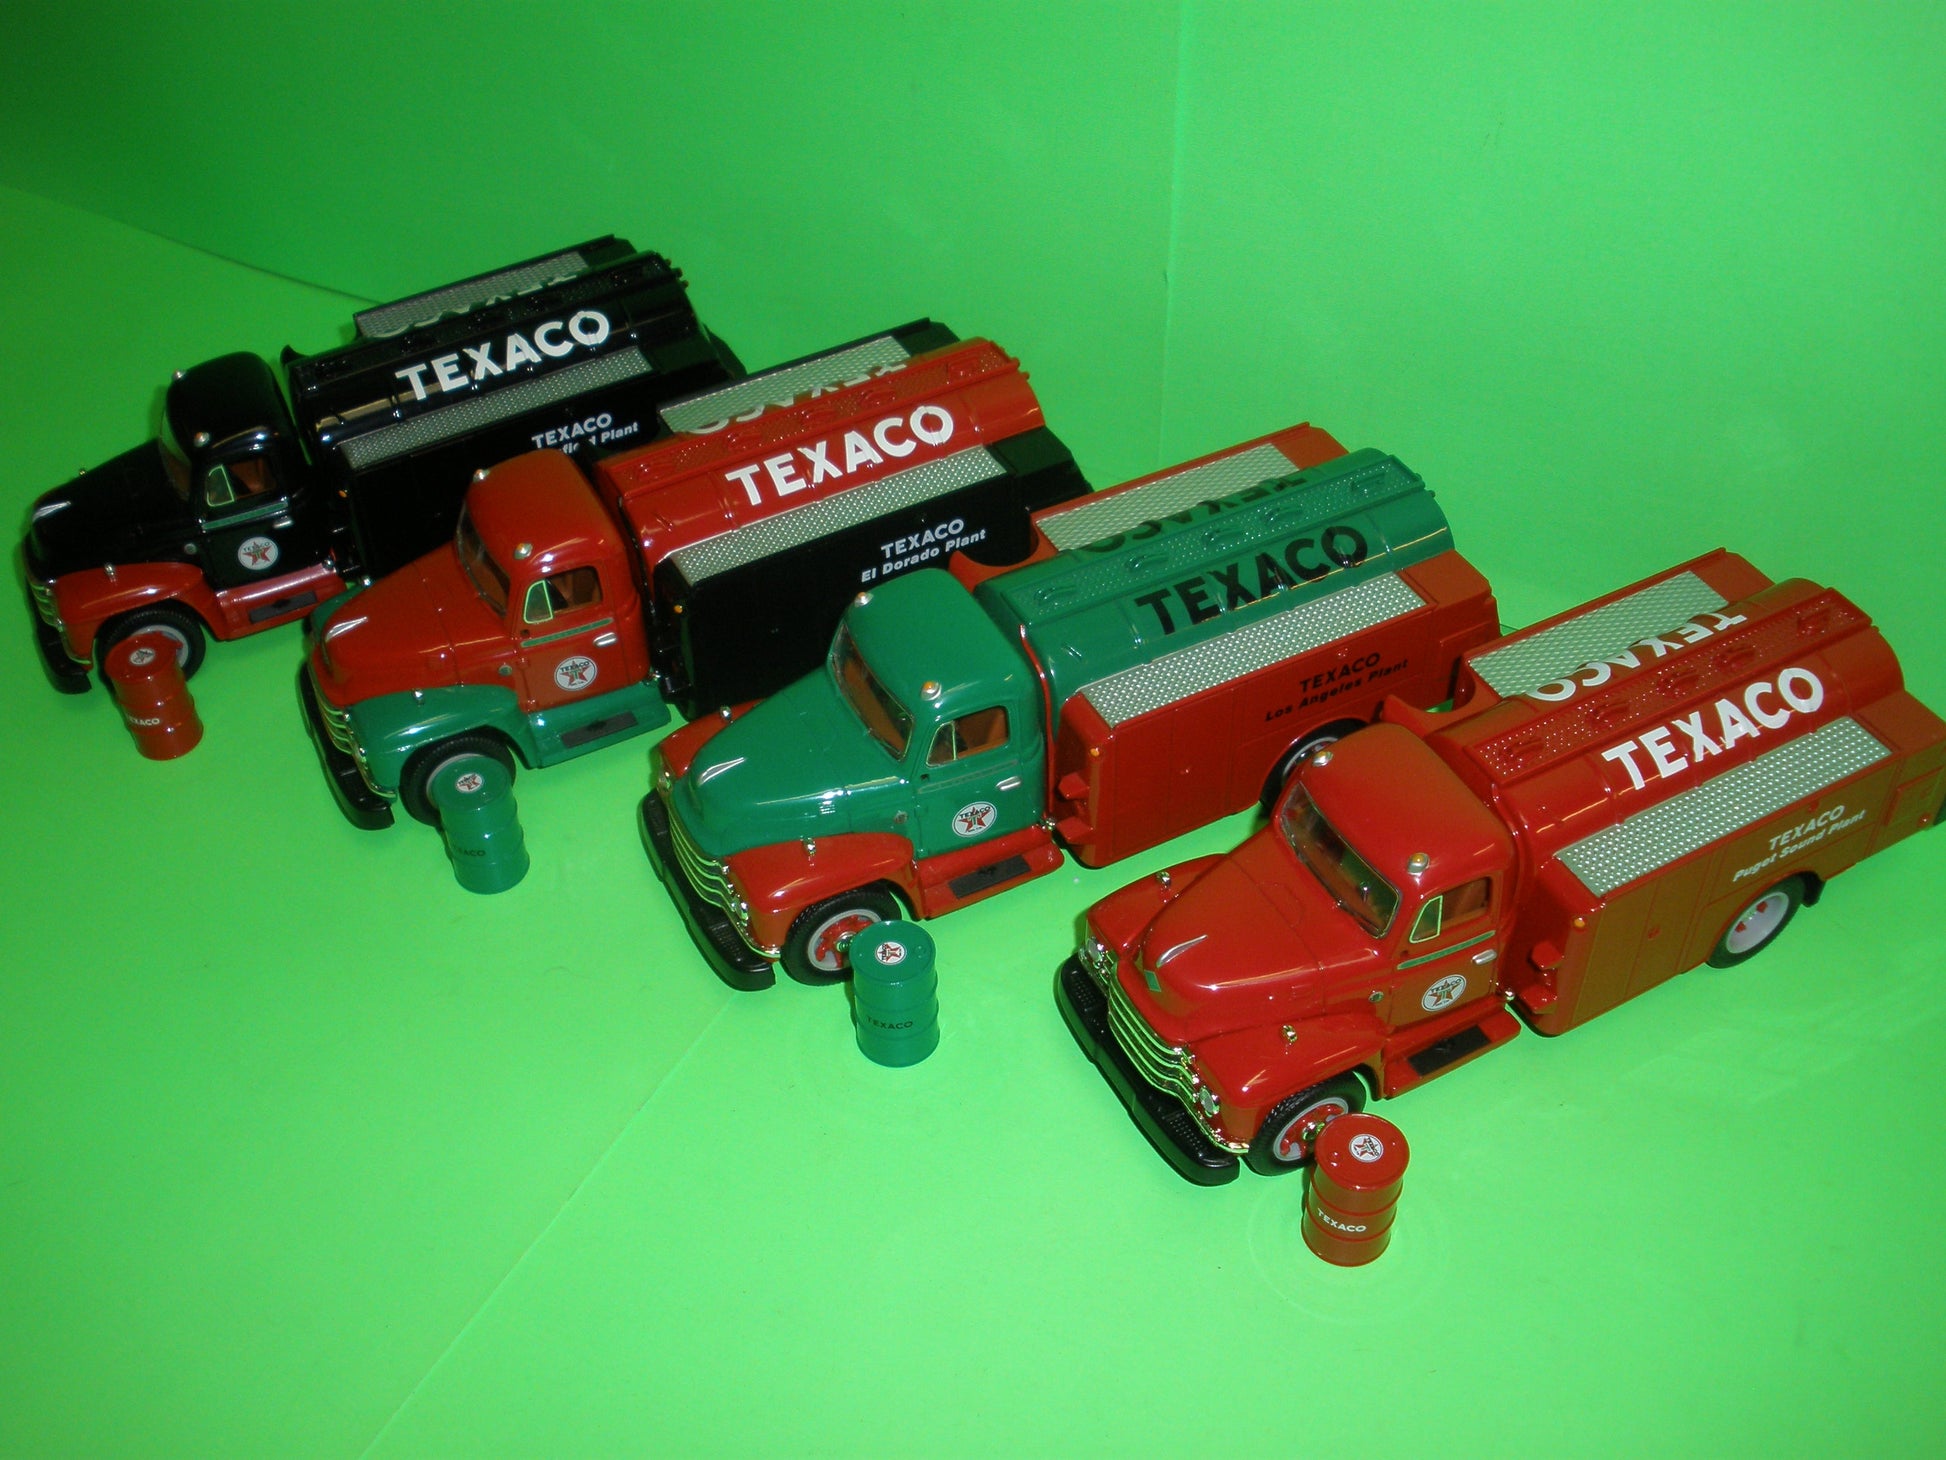 Texaco Refinery Series Set of 4 with Matching Serial Numbers - 1955 Diamond T Tanker Trucks